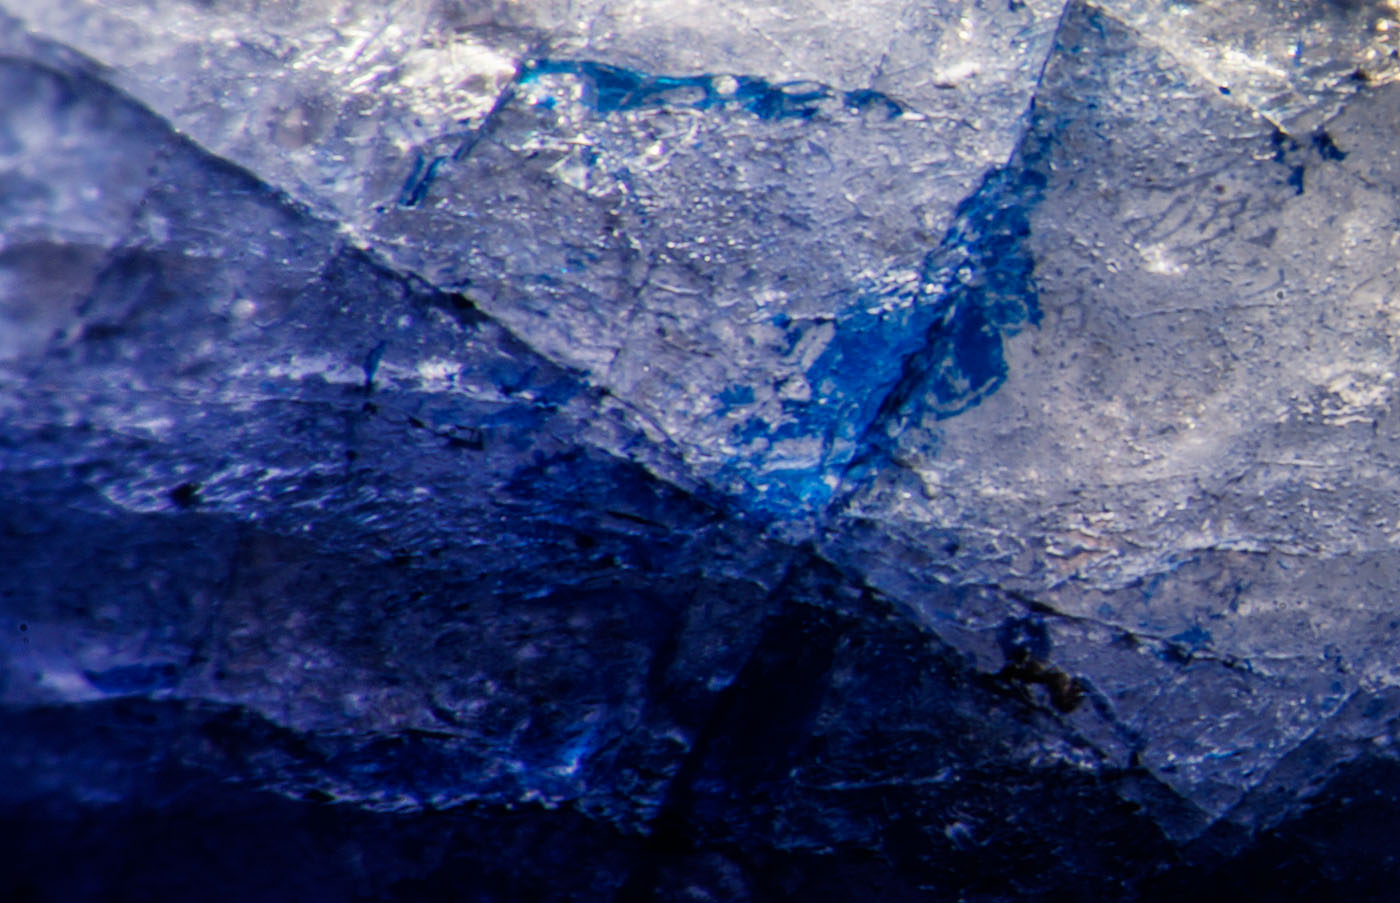 Figure 6. Blue cobalt-doped glass fills a surface-reaching fissure in this first-generation stone. Oblique fiber-optic illumination. Photo: Wimon Manorotkul